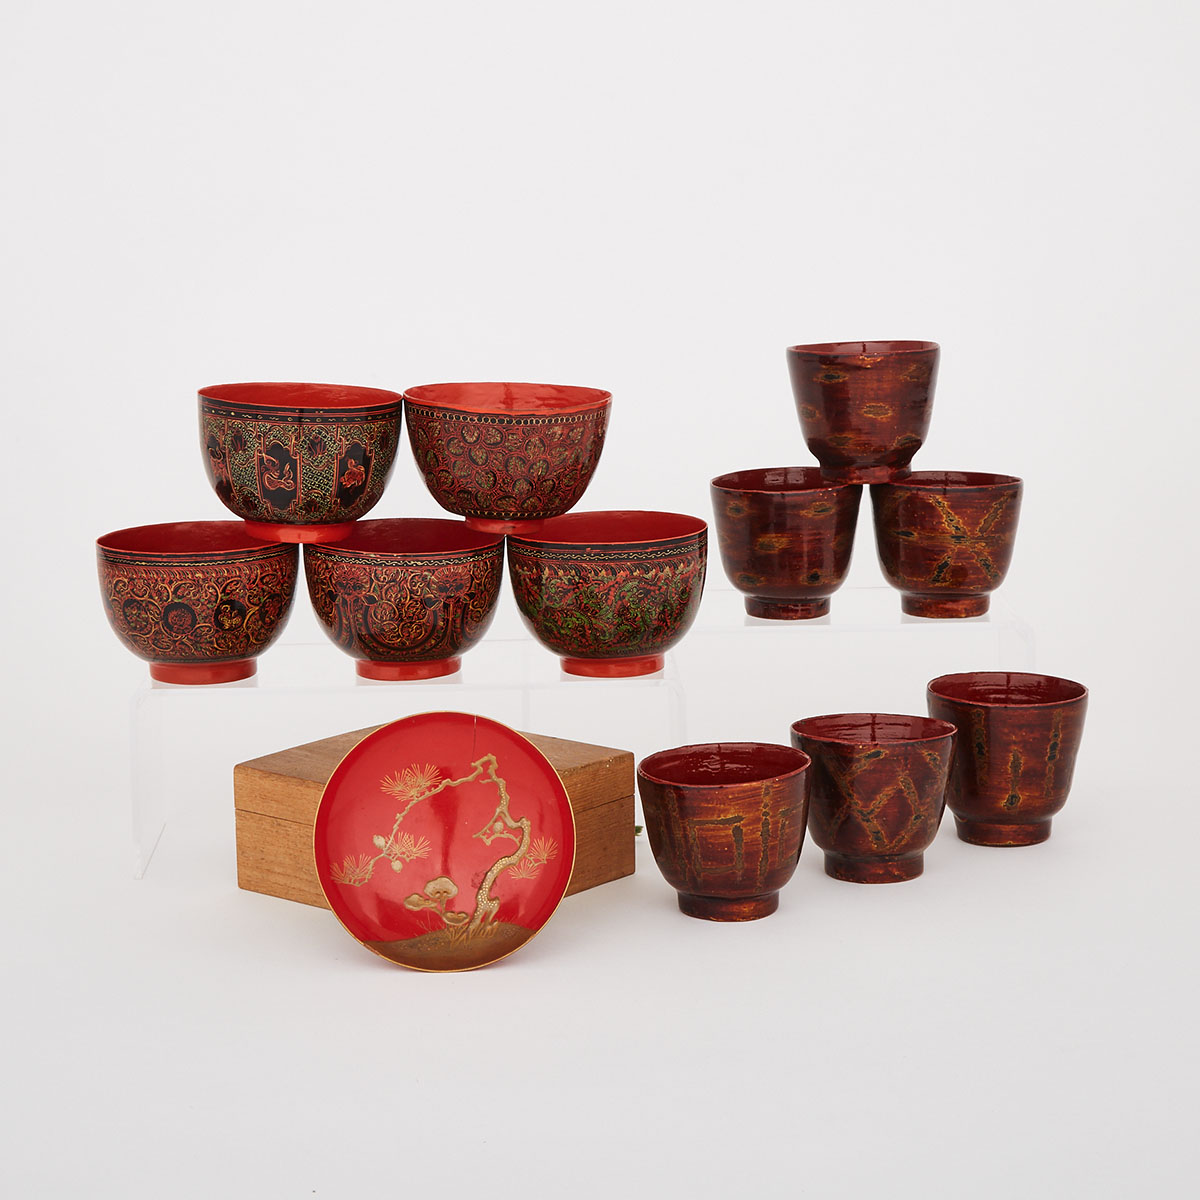 A Group of Twelve Red Lacquer Wares